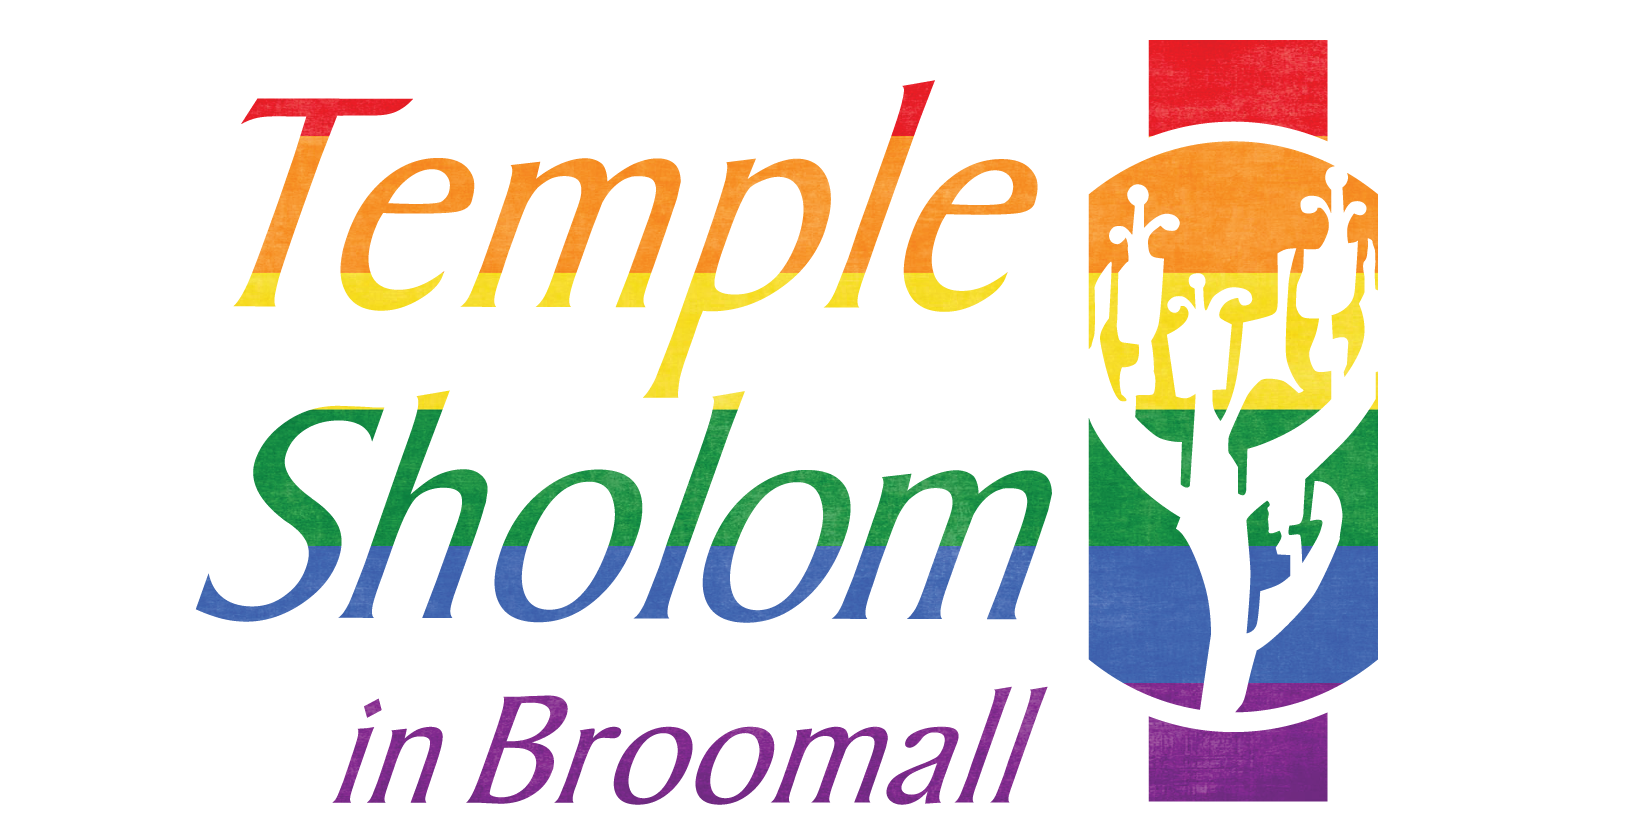 Temple Sholom in Broomall